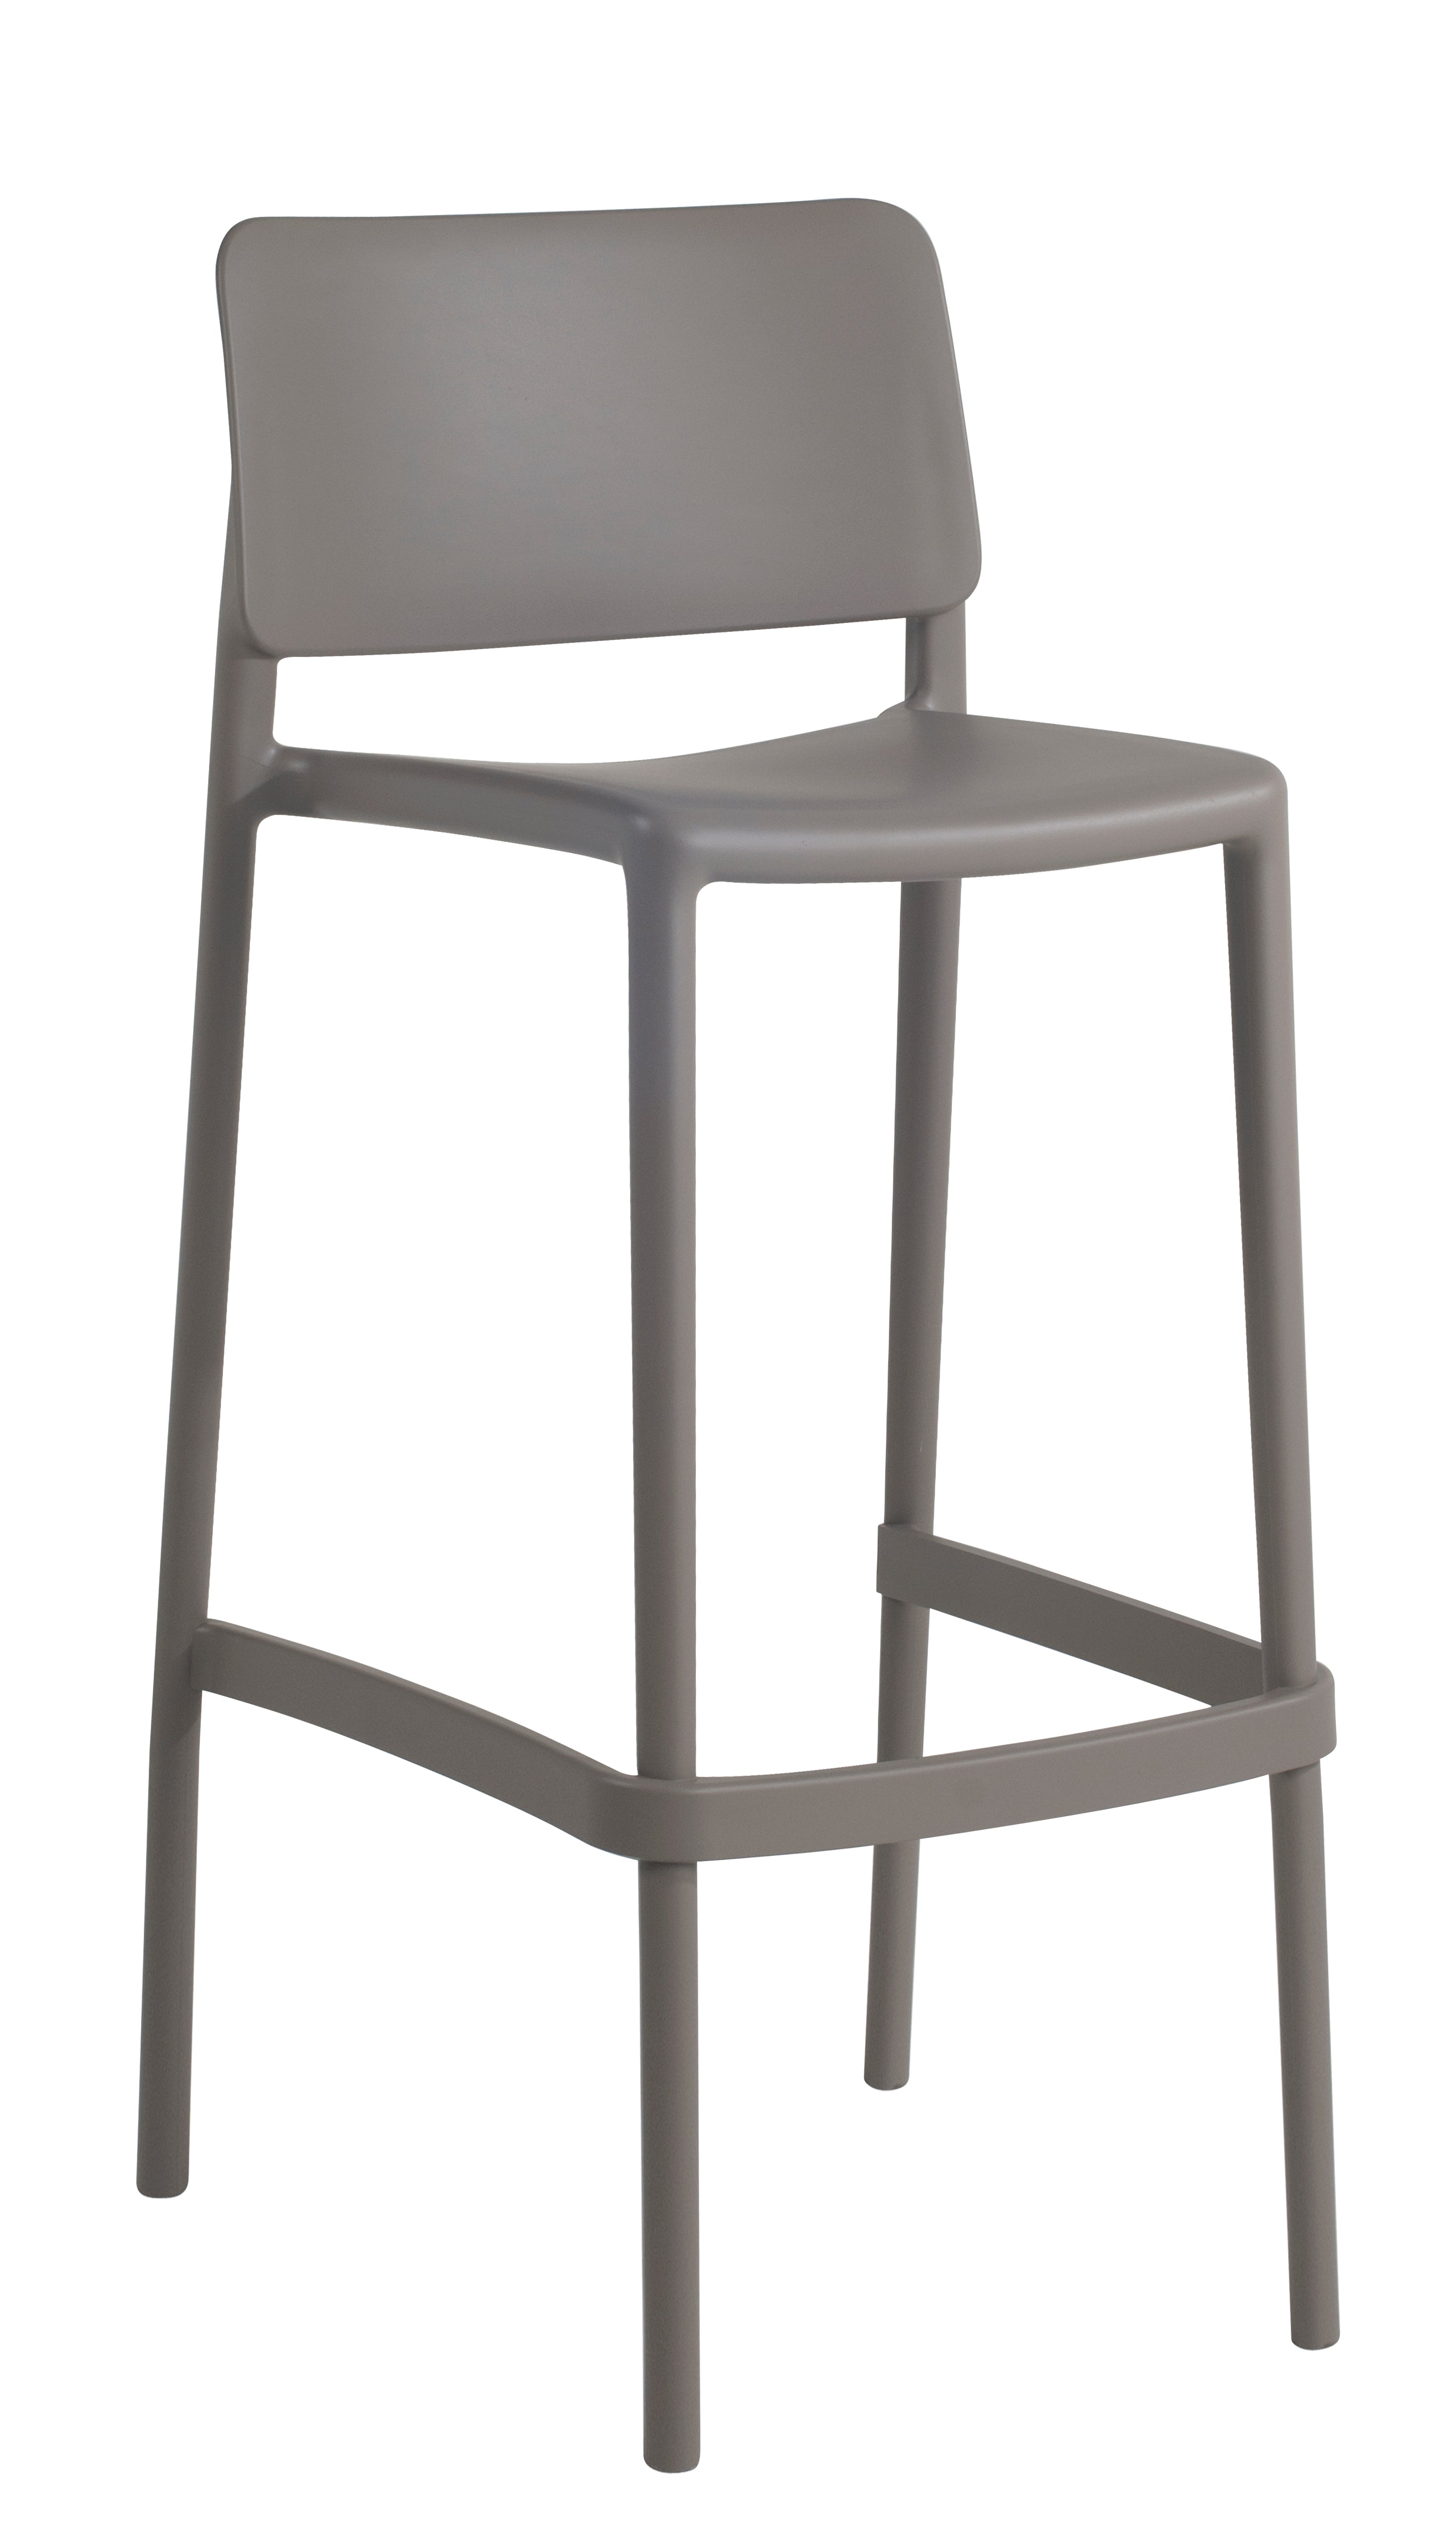 Cleo Patio Plastic Stackable Bar Height Bar Stool in Taupe - (Set of 2)